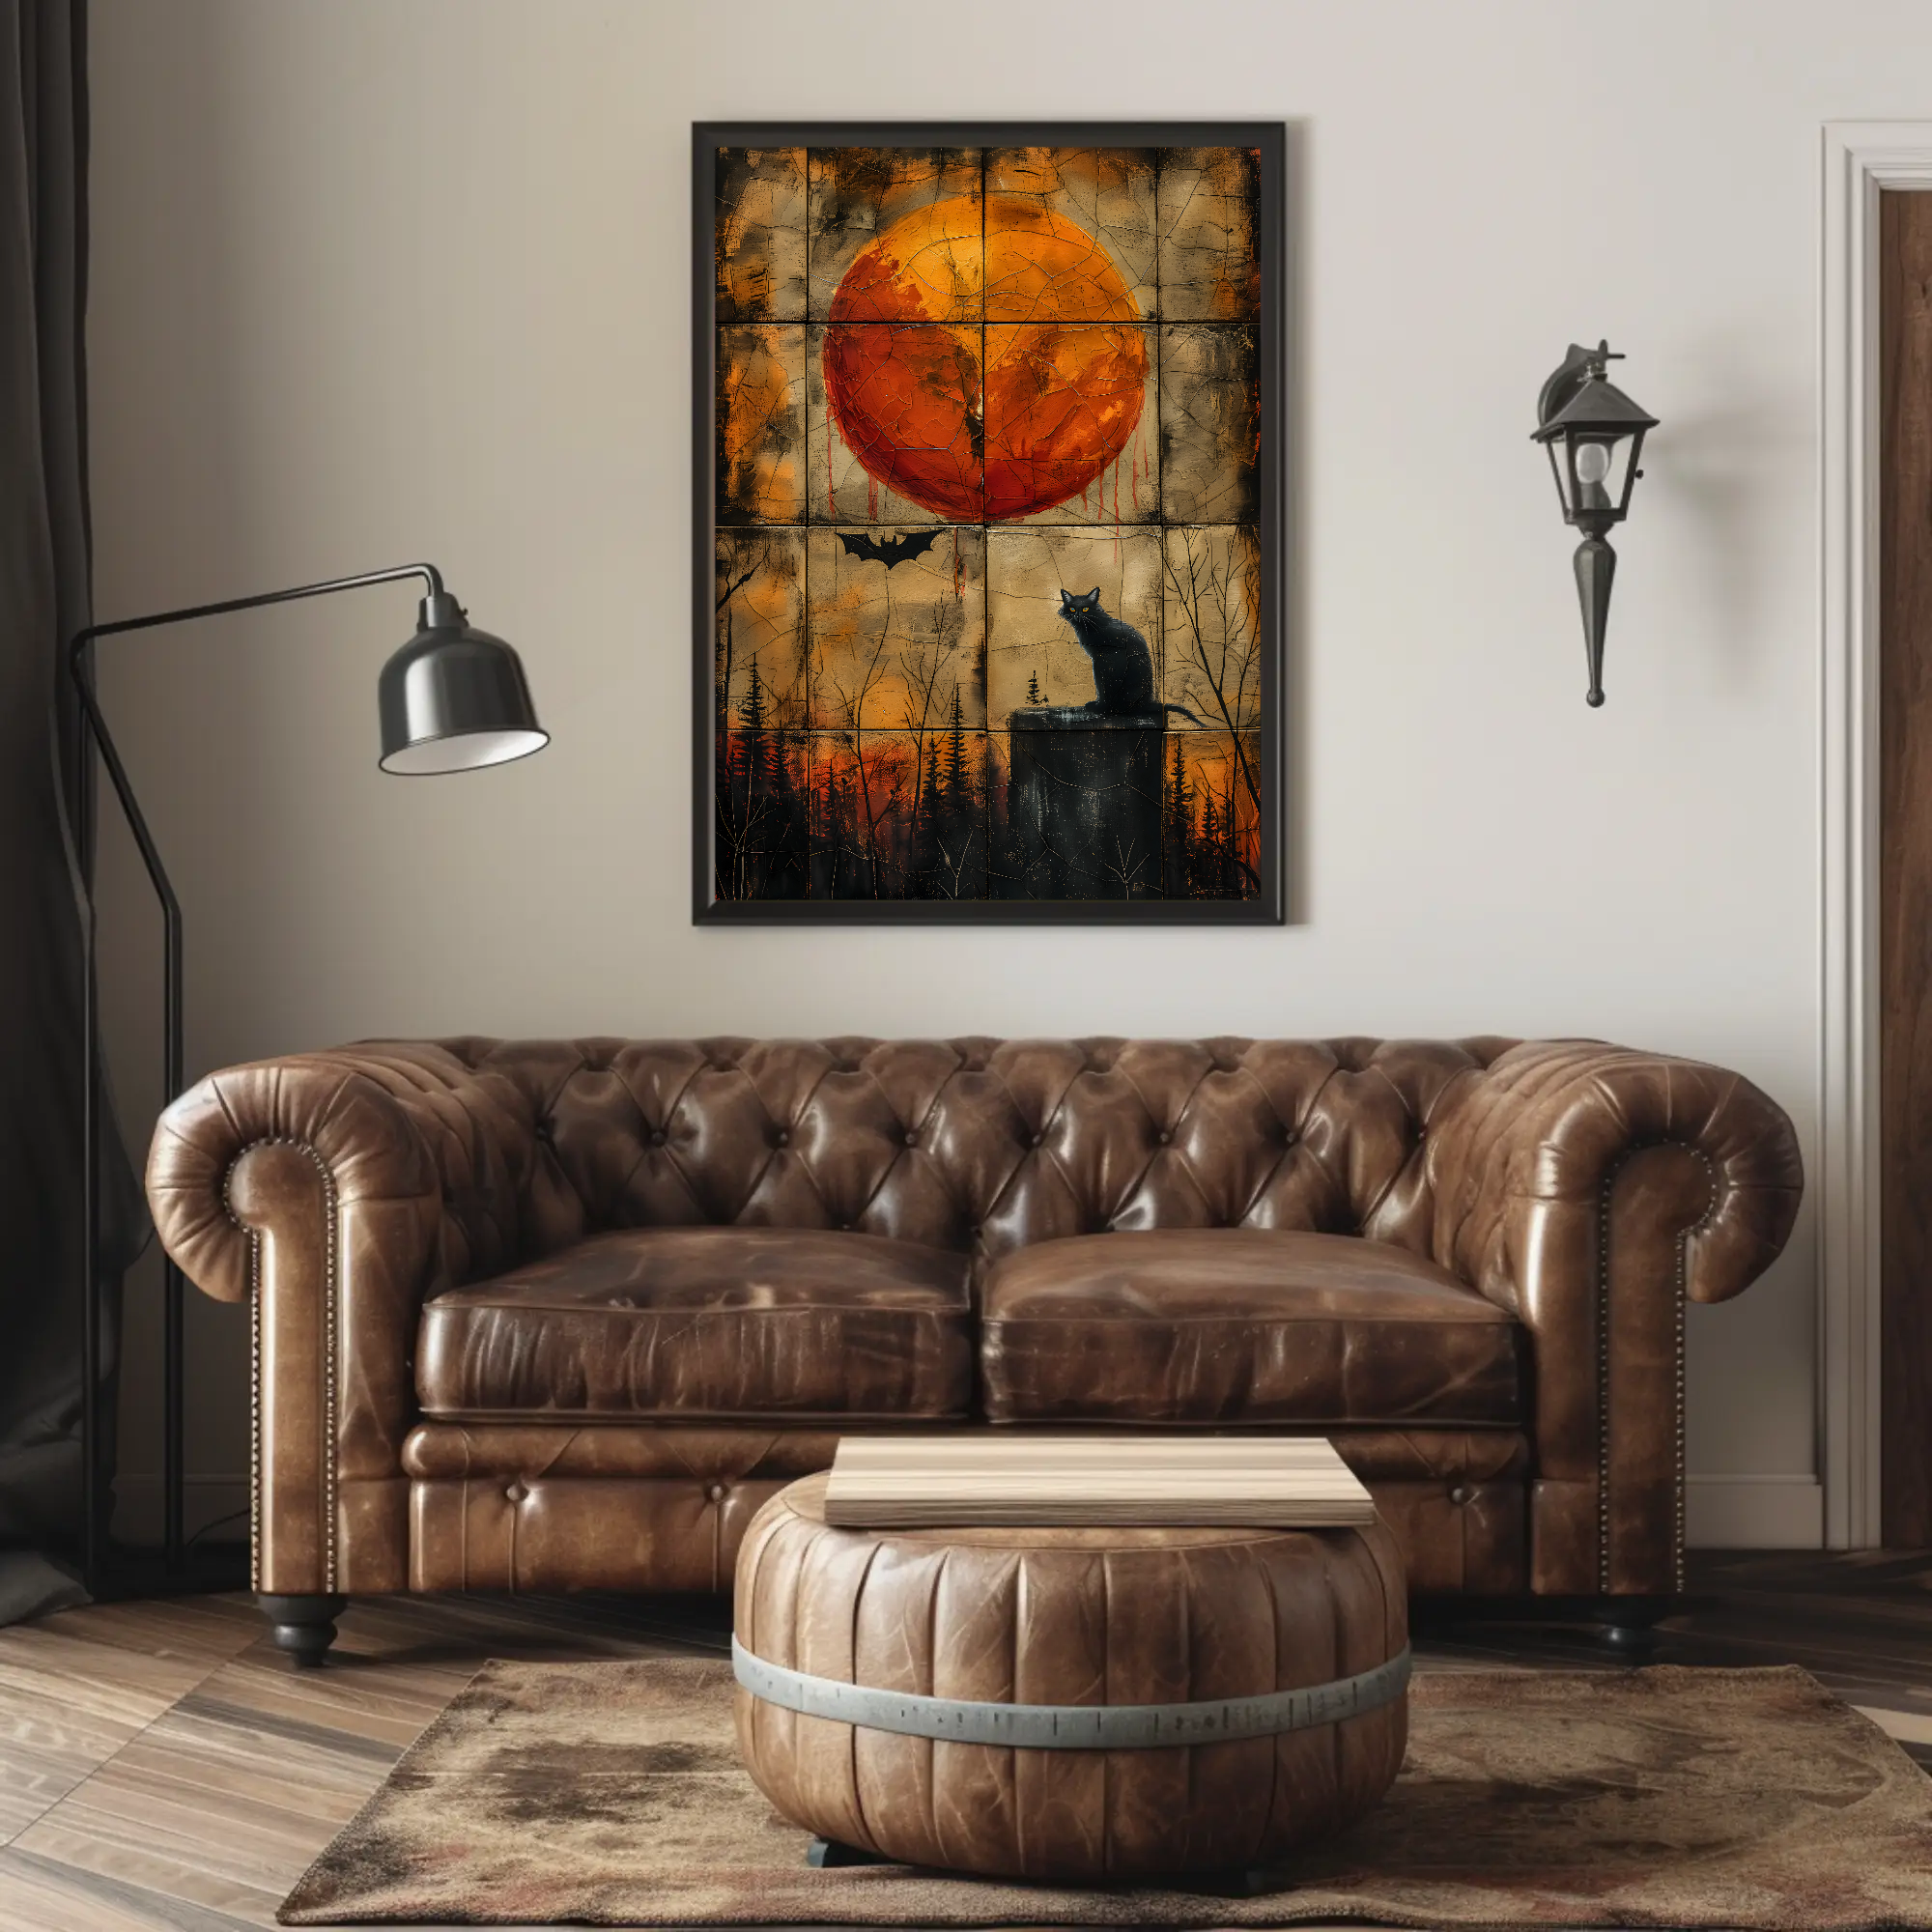 Blood Moon Cat Wall Art: Goth Painting for Gothic Halloween Decor